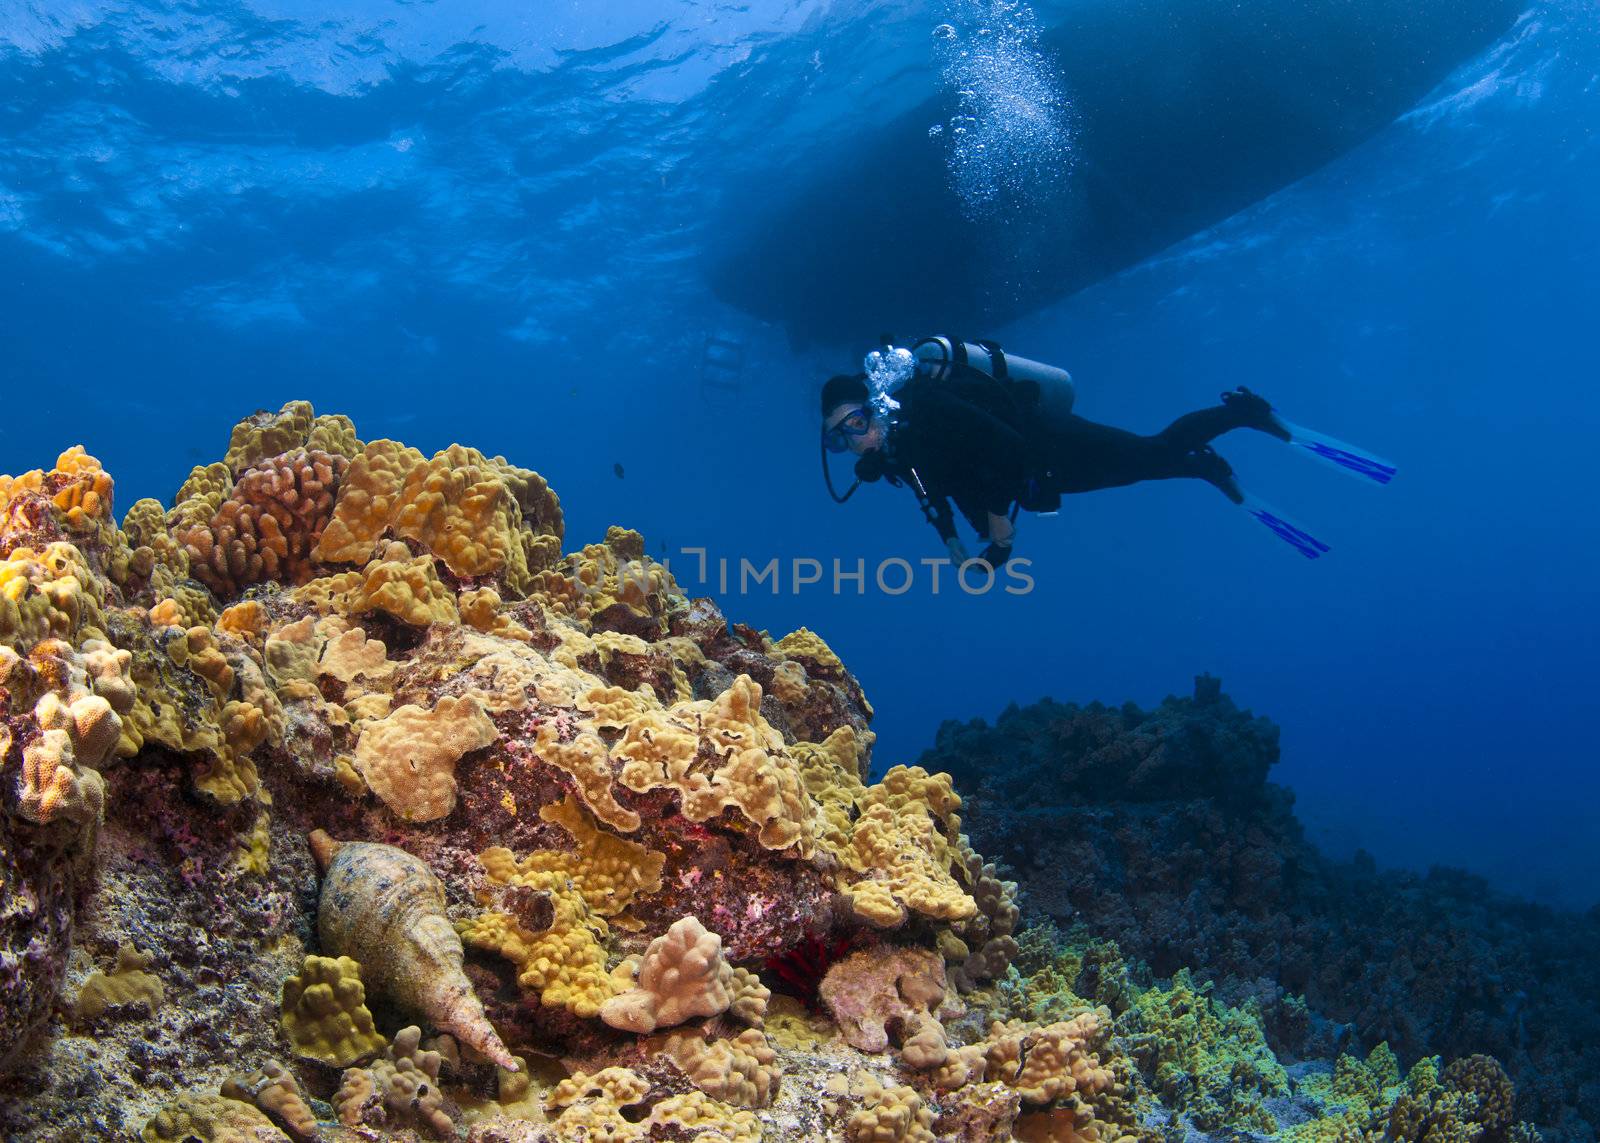 Scuba Diver and Trtons Trumpet Snail in the foreground